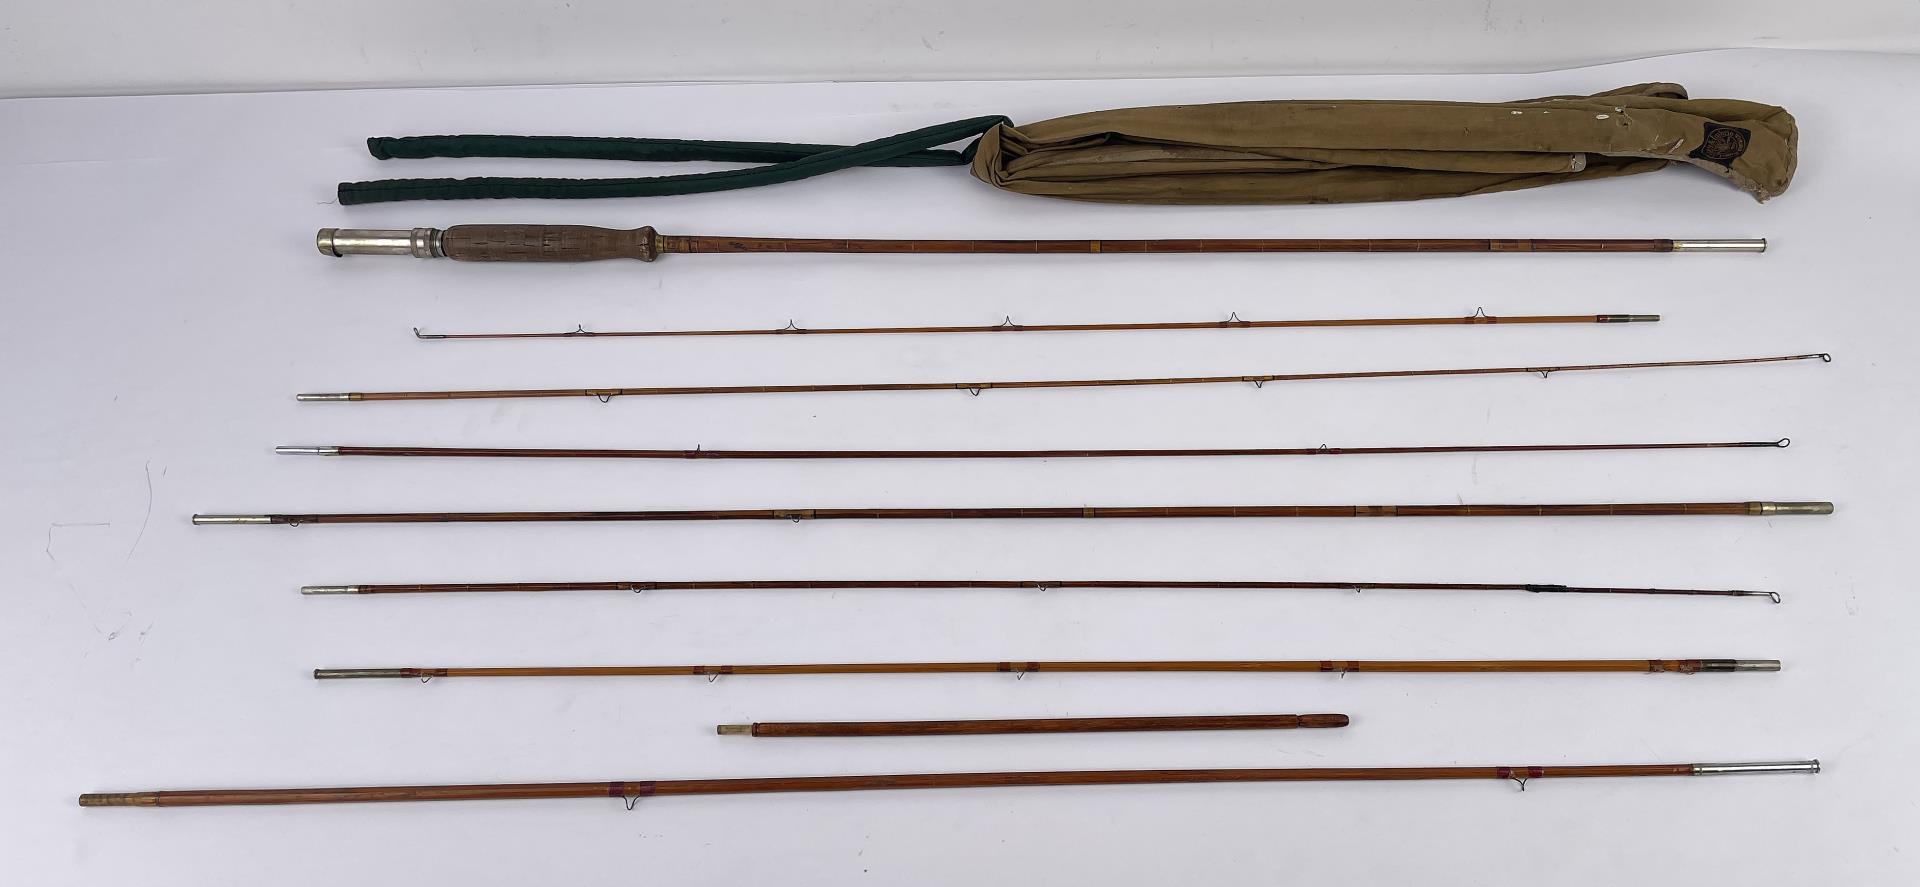 Antique Bamboo Fly Fishing Rod Abbey Imbrie